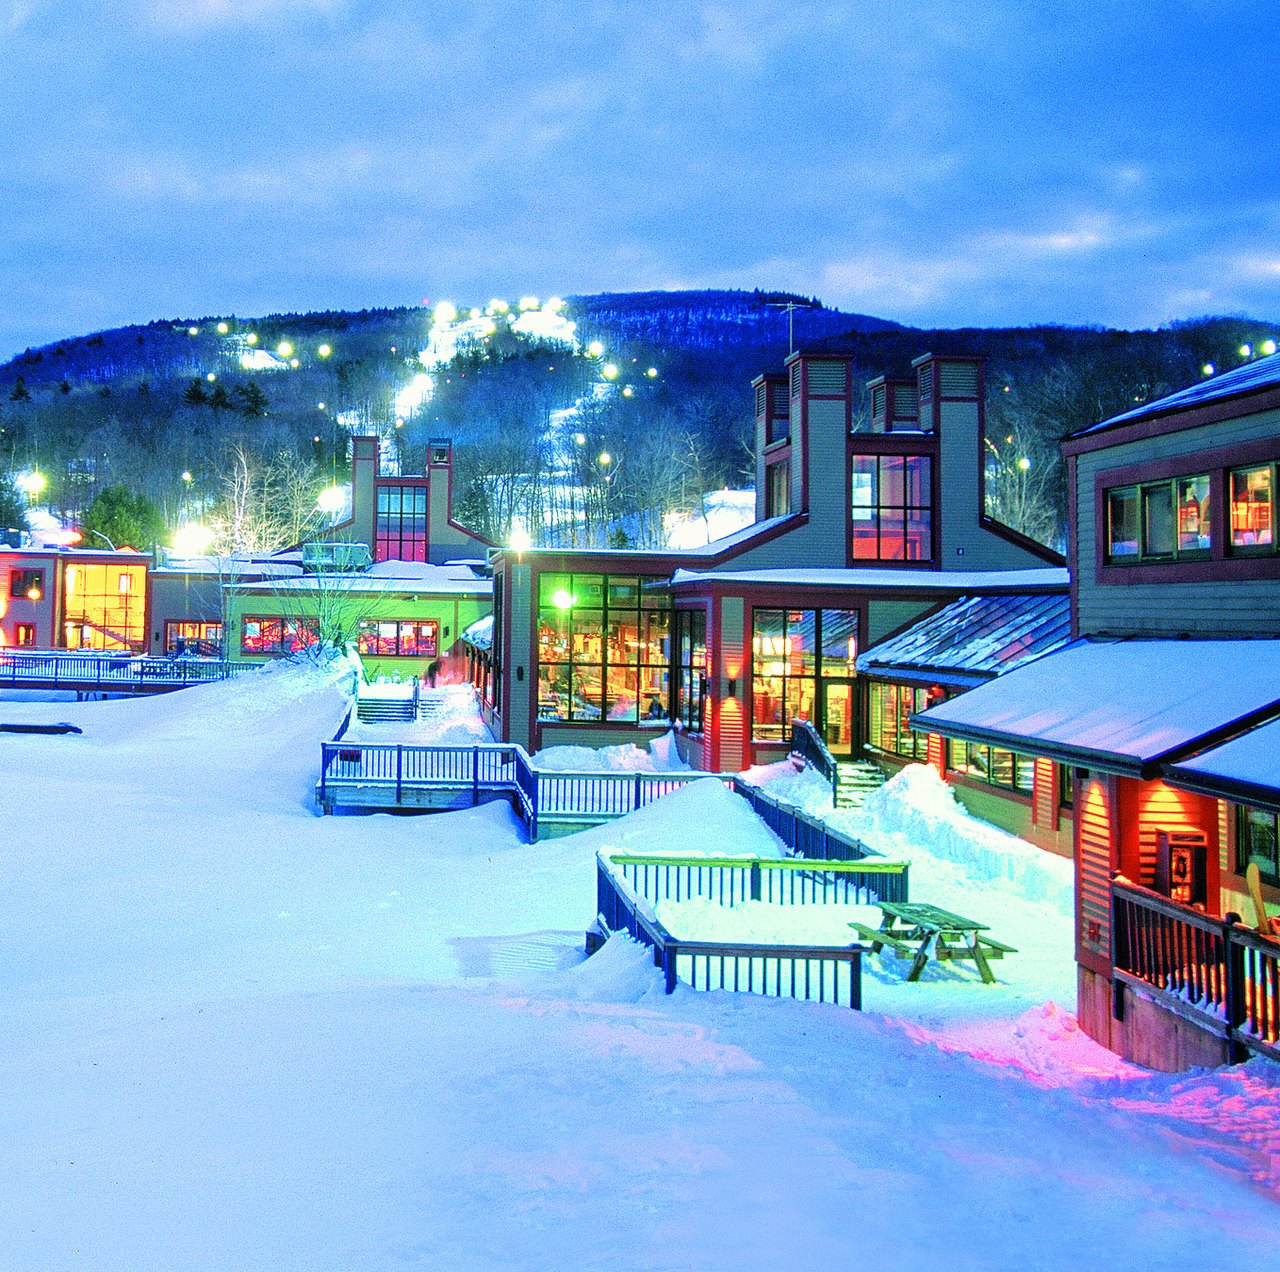 Everyone From Massachusetts Should Take This Awesome Mountain Vacation